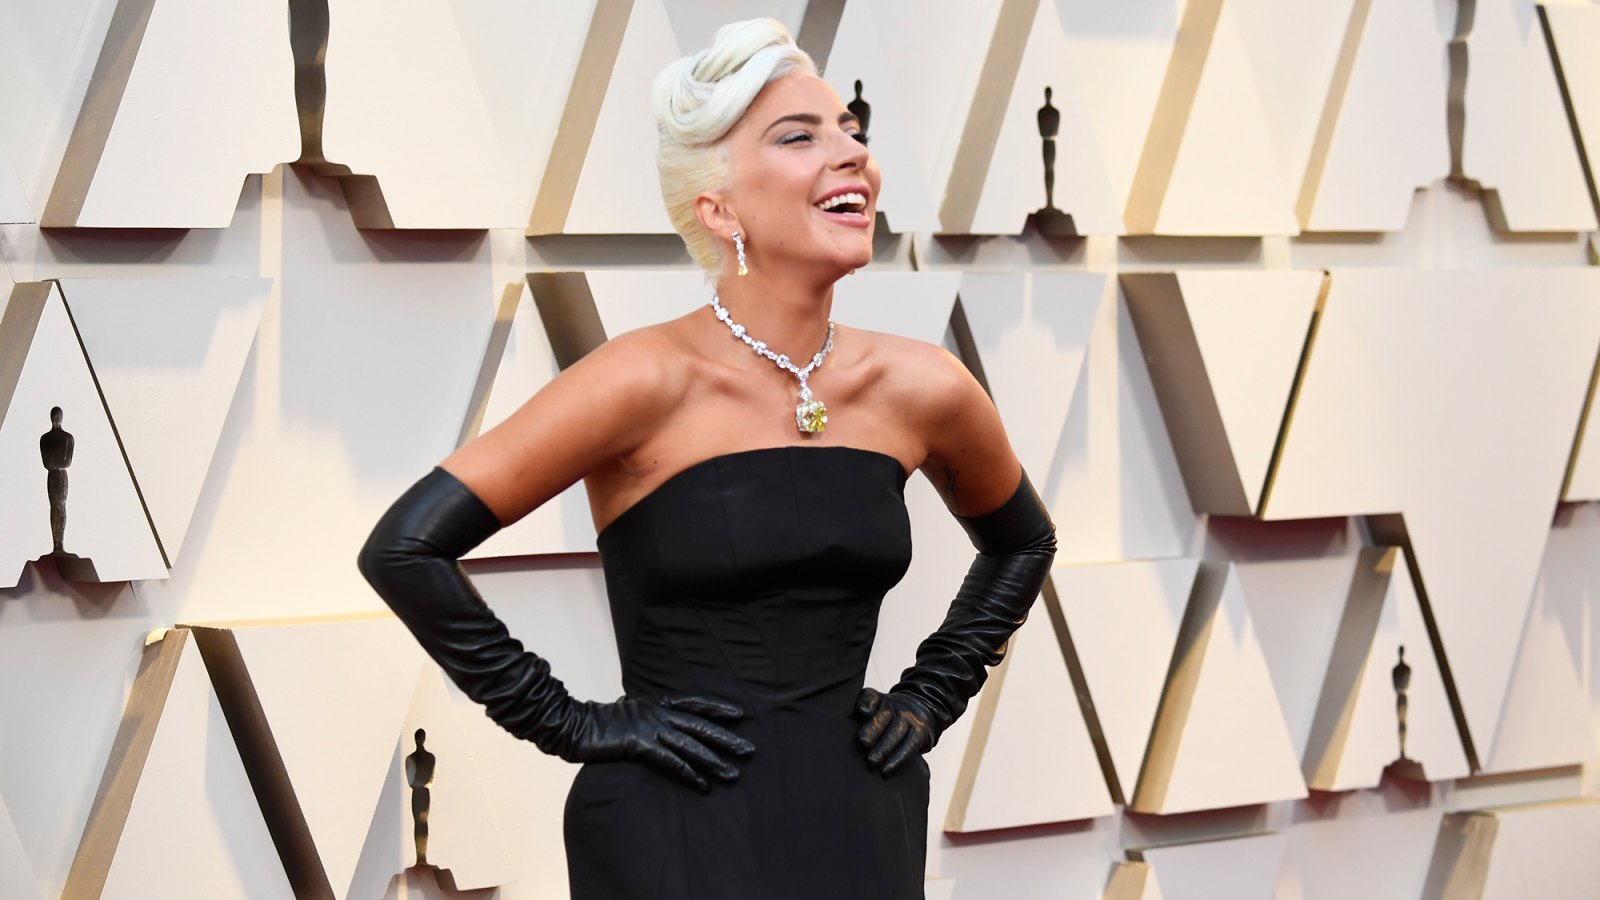 Lady Gaga Slays at the 2019 Oscars After Split From Fiance Christian Carino